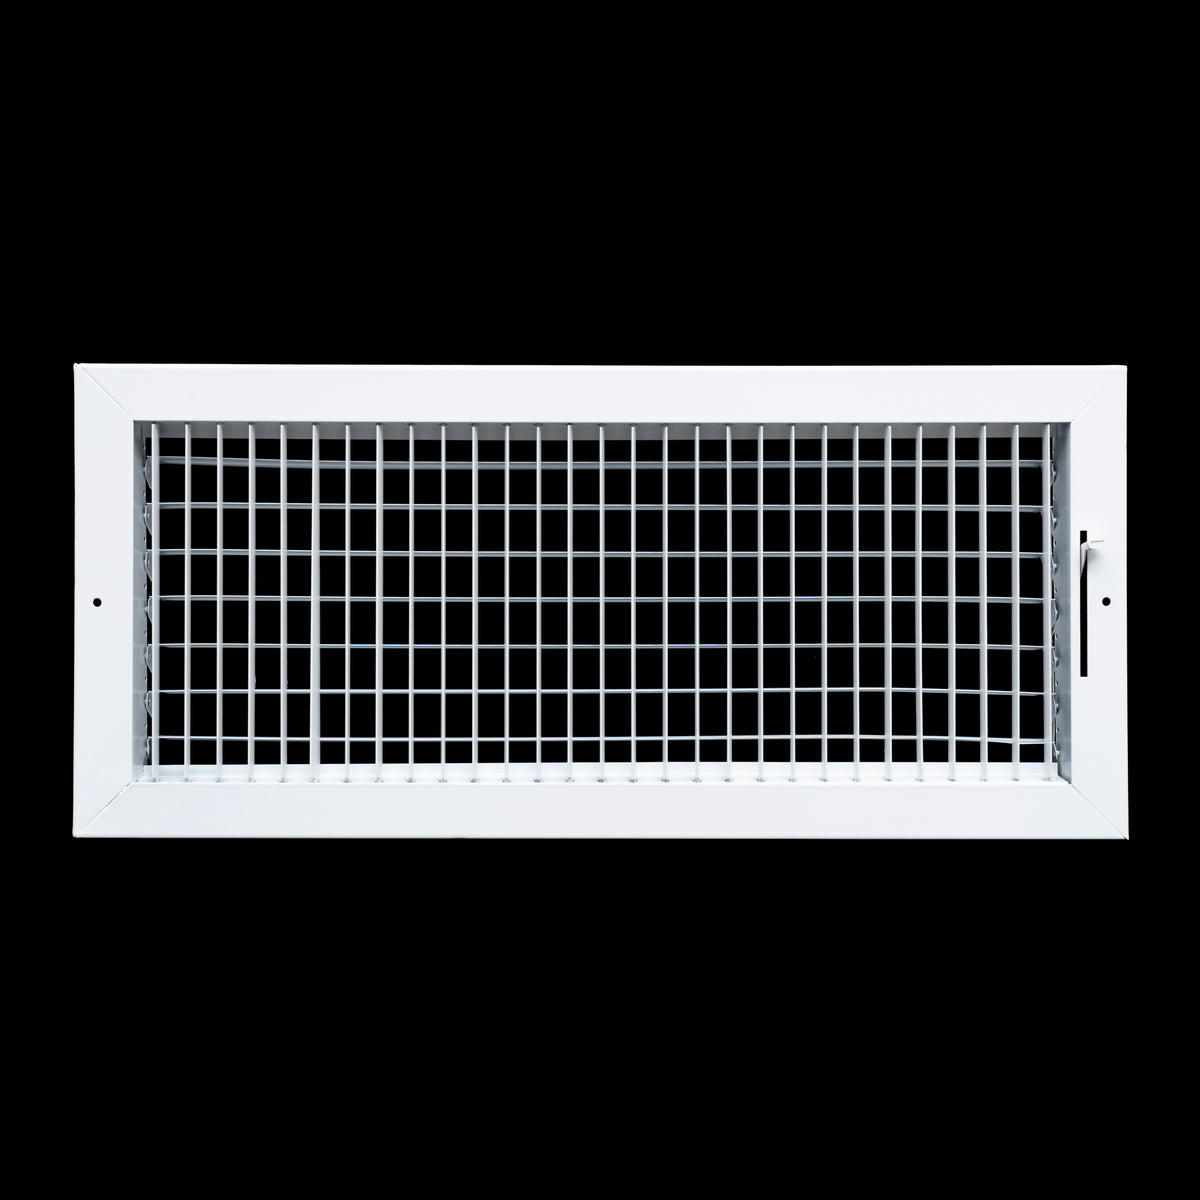 airgrilles 20x8 steel adjustable air supply grille register vent cover grill for sidewall and ceiling White  Outer Dimensions: 21.75"W X 9.75"H for 20x8 Duct Opening